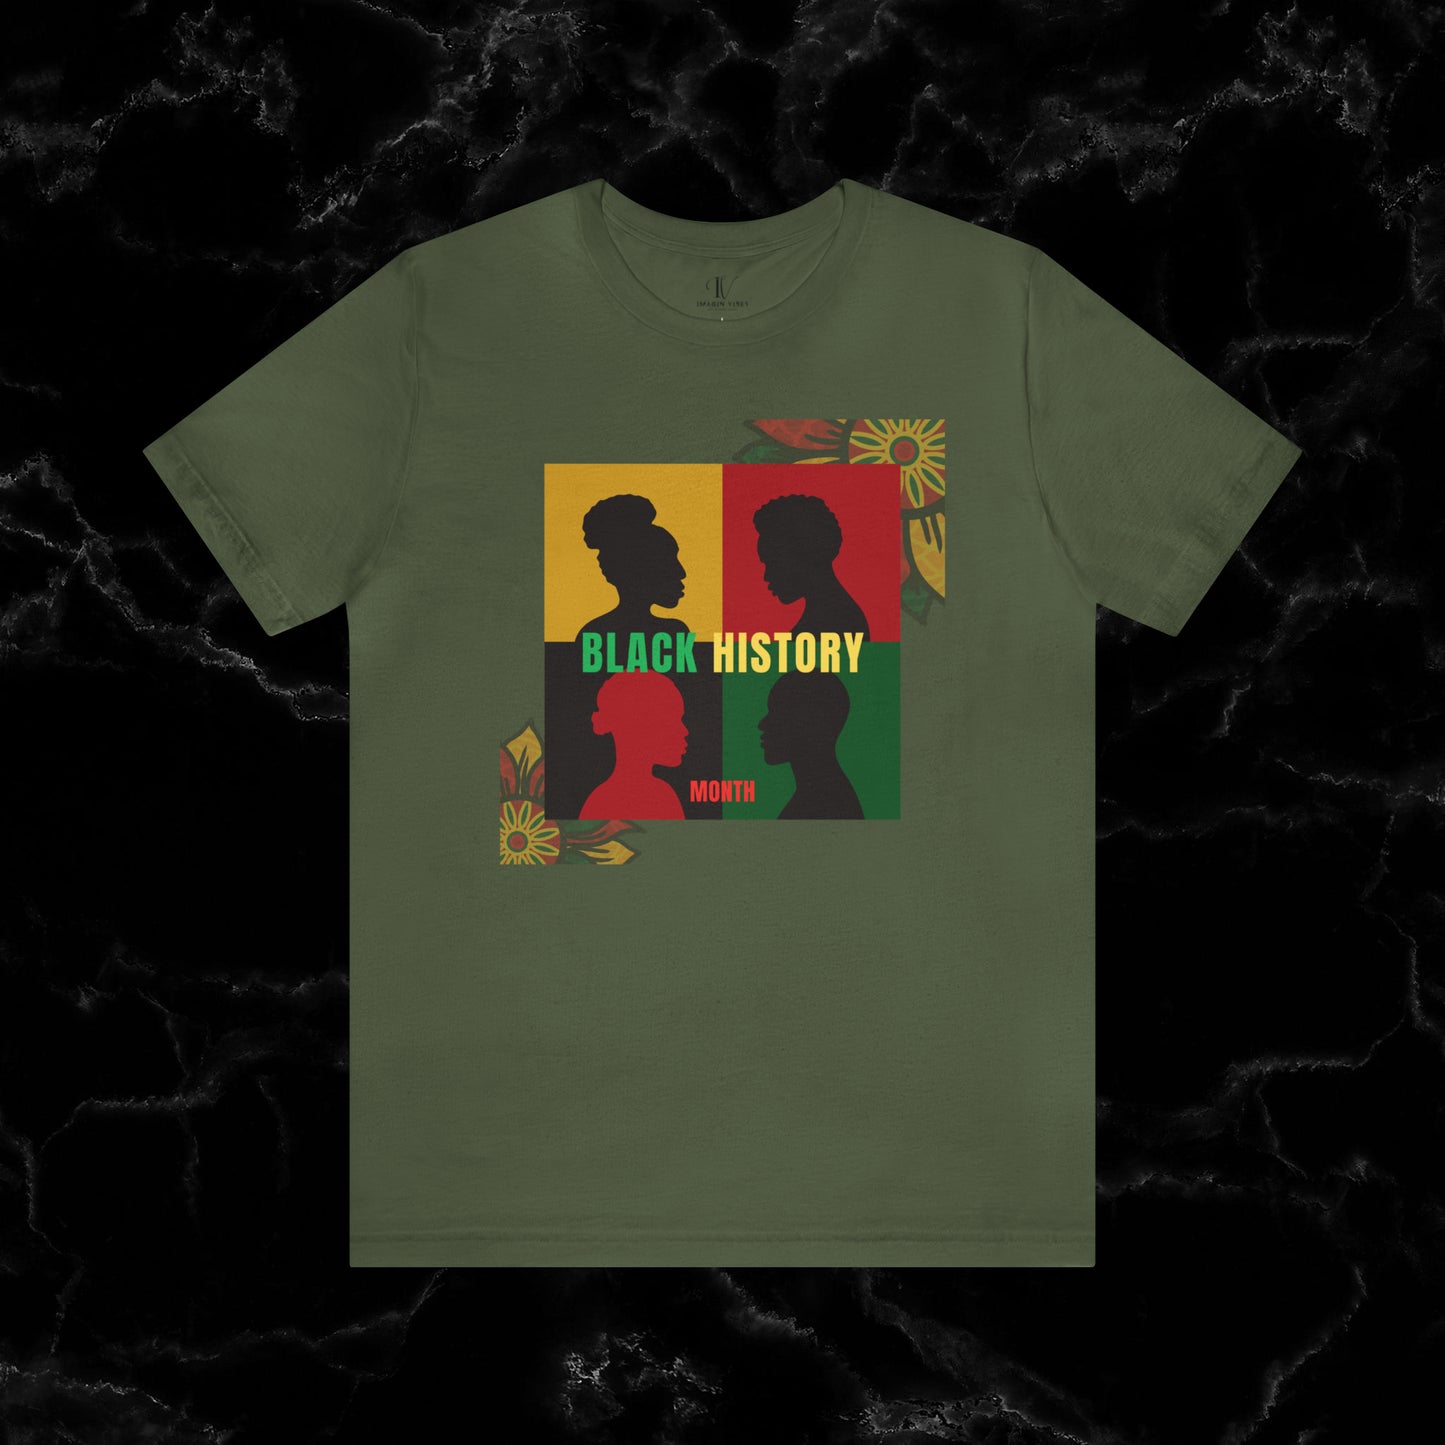 Trendy Black History Month Shirts Celebrating African American Pride and Heritage T-Shirt Military Green XS 